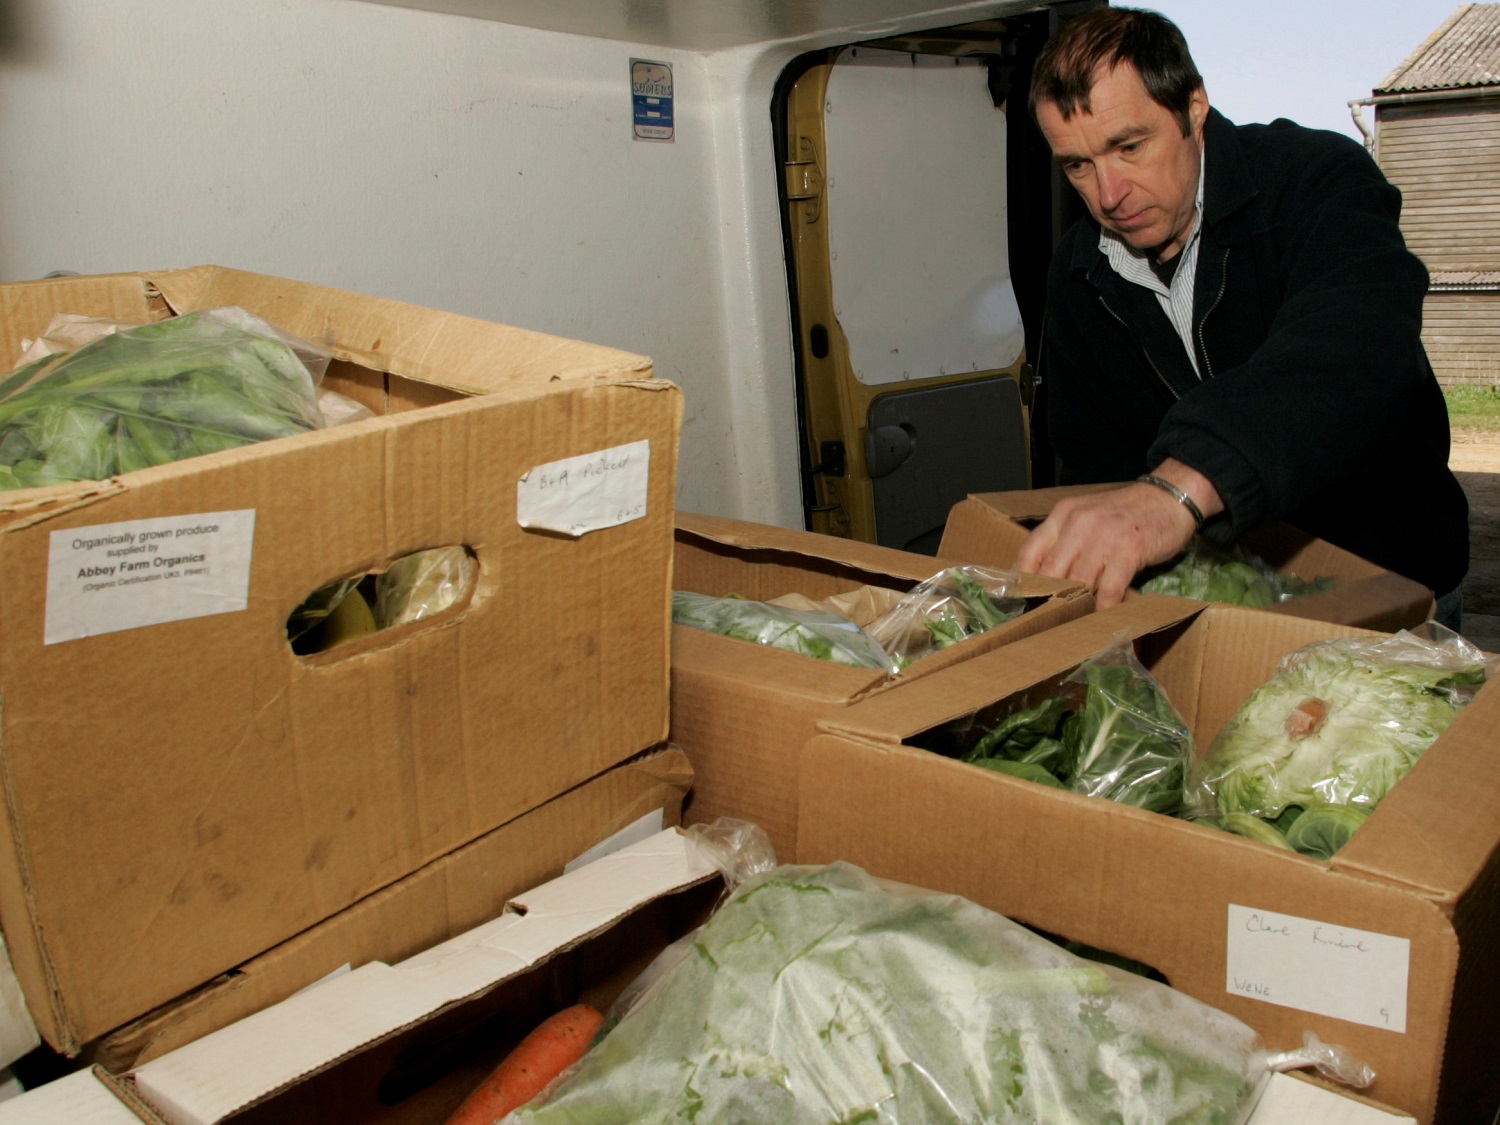 Image by Andy Hay: Van being loaded with boxes of organic fruit & vegetables, ready for delivery. Copyright: RSPB